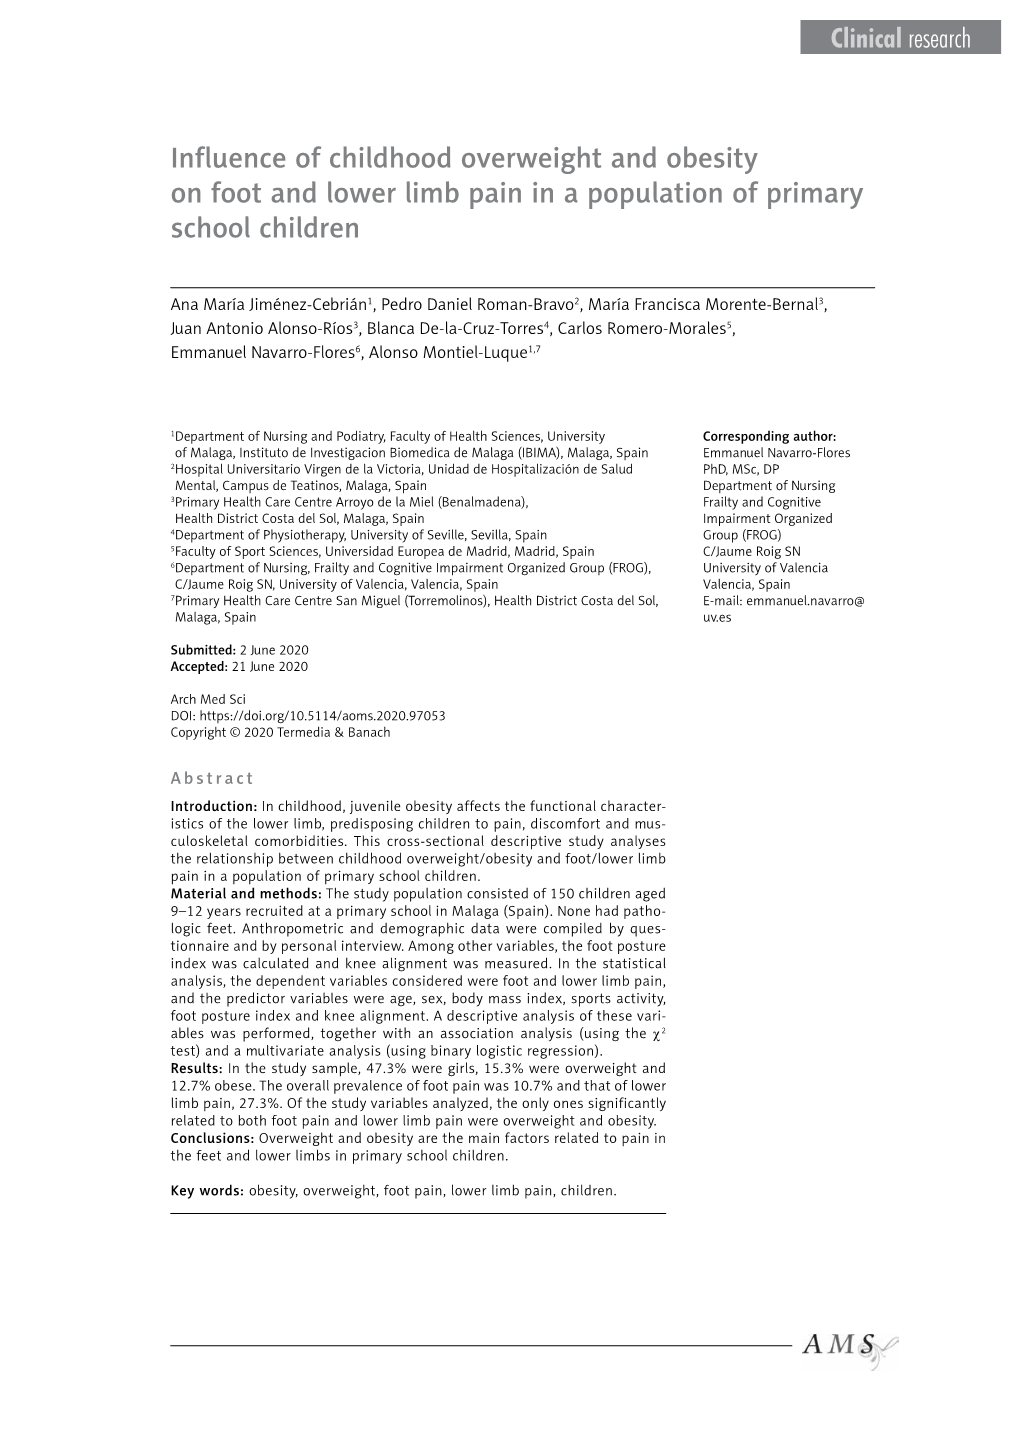 Influence of Childhood Overweight and Obesity on Foot and Lower Limb Pain in a Population of Primary School Children